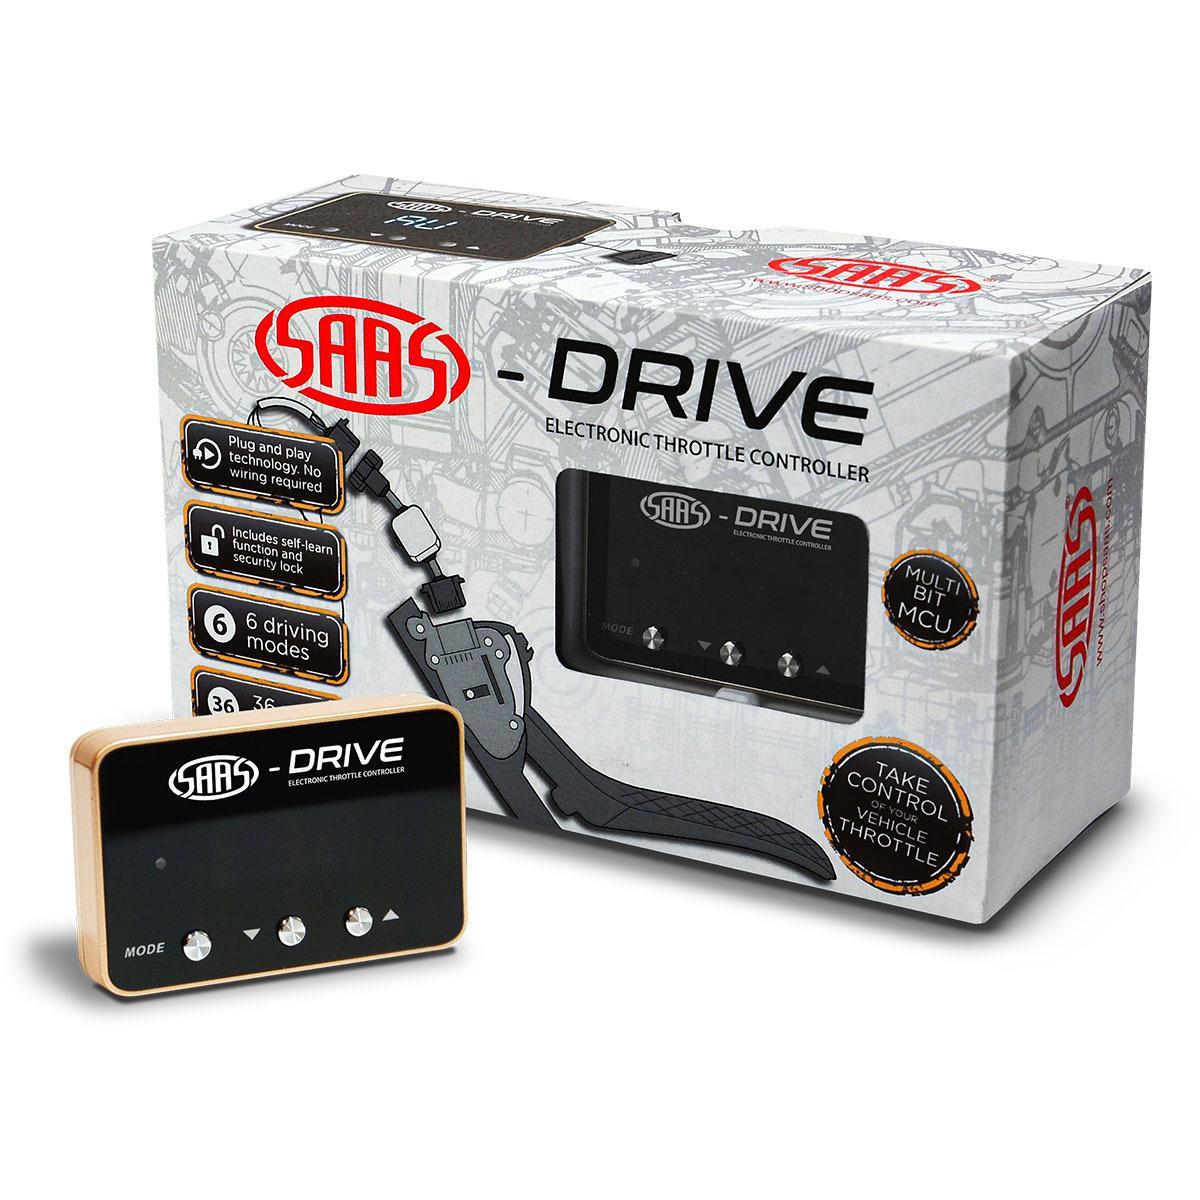 SAAS-Drive Throttle Controller For Volkswagen Beetle A5 2011 >